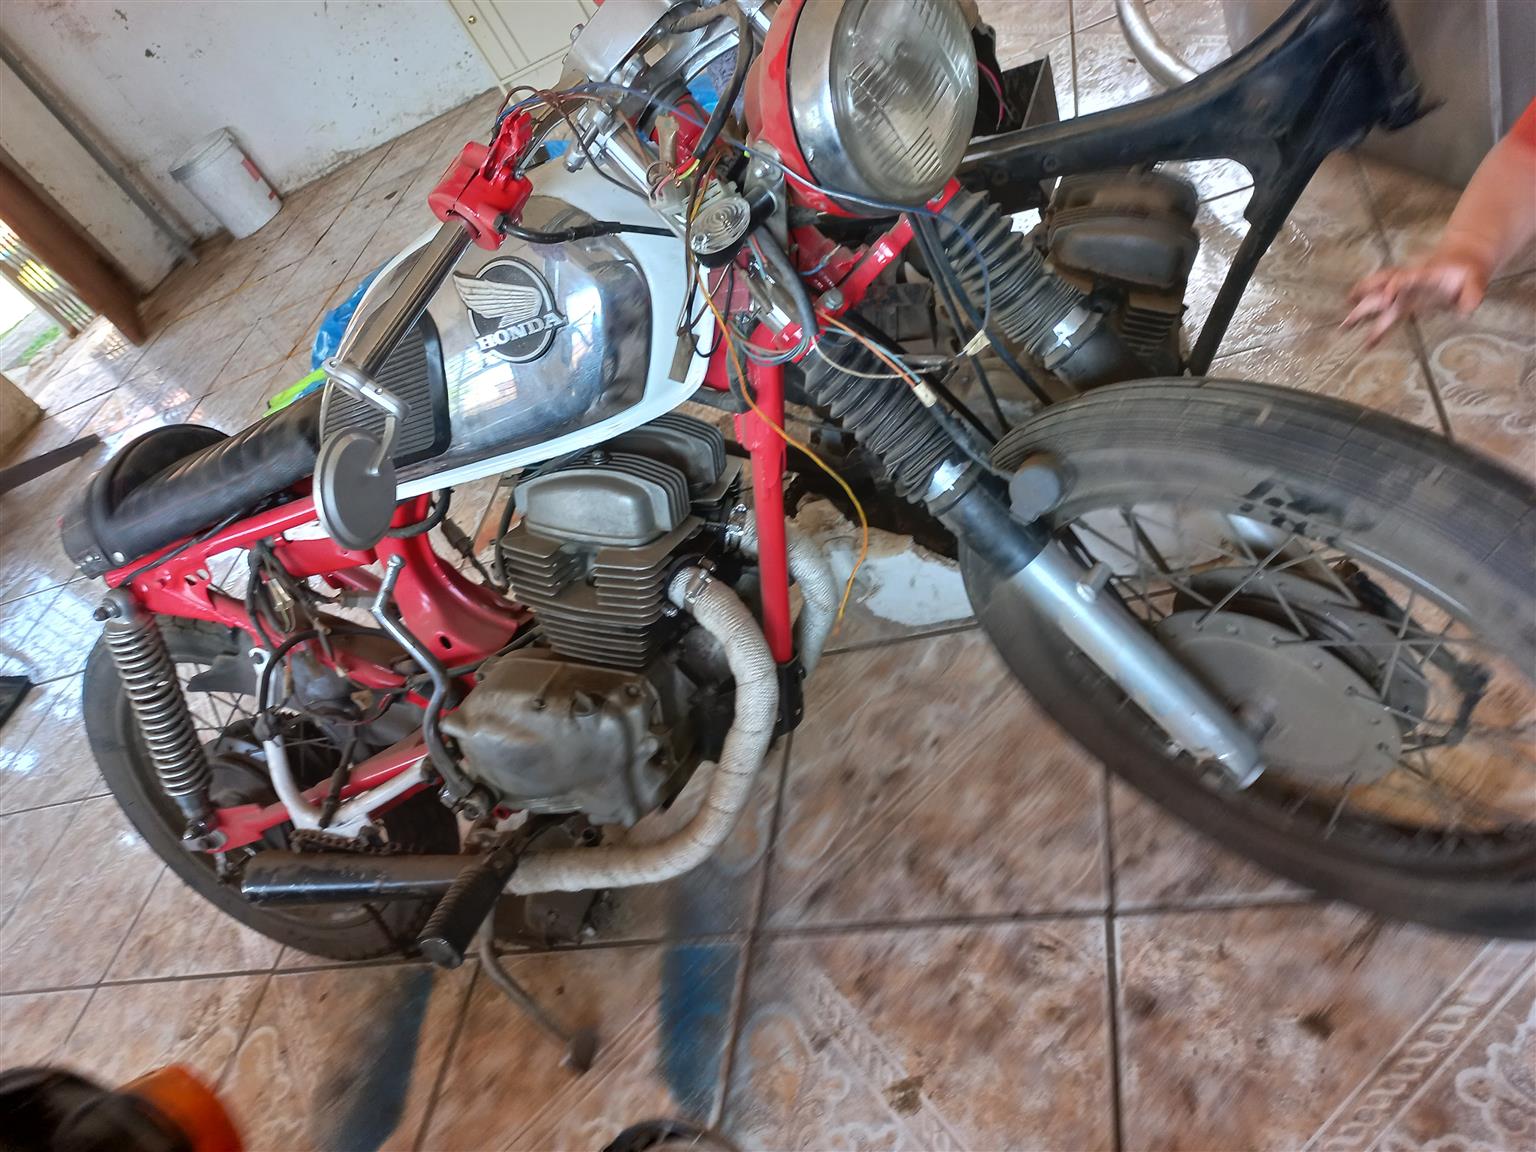 Honda CD200 bike and spares to complete second one